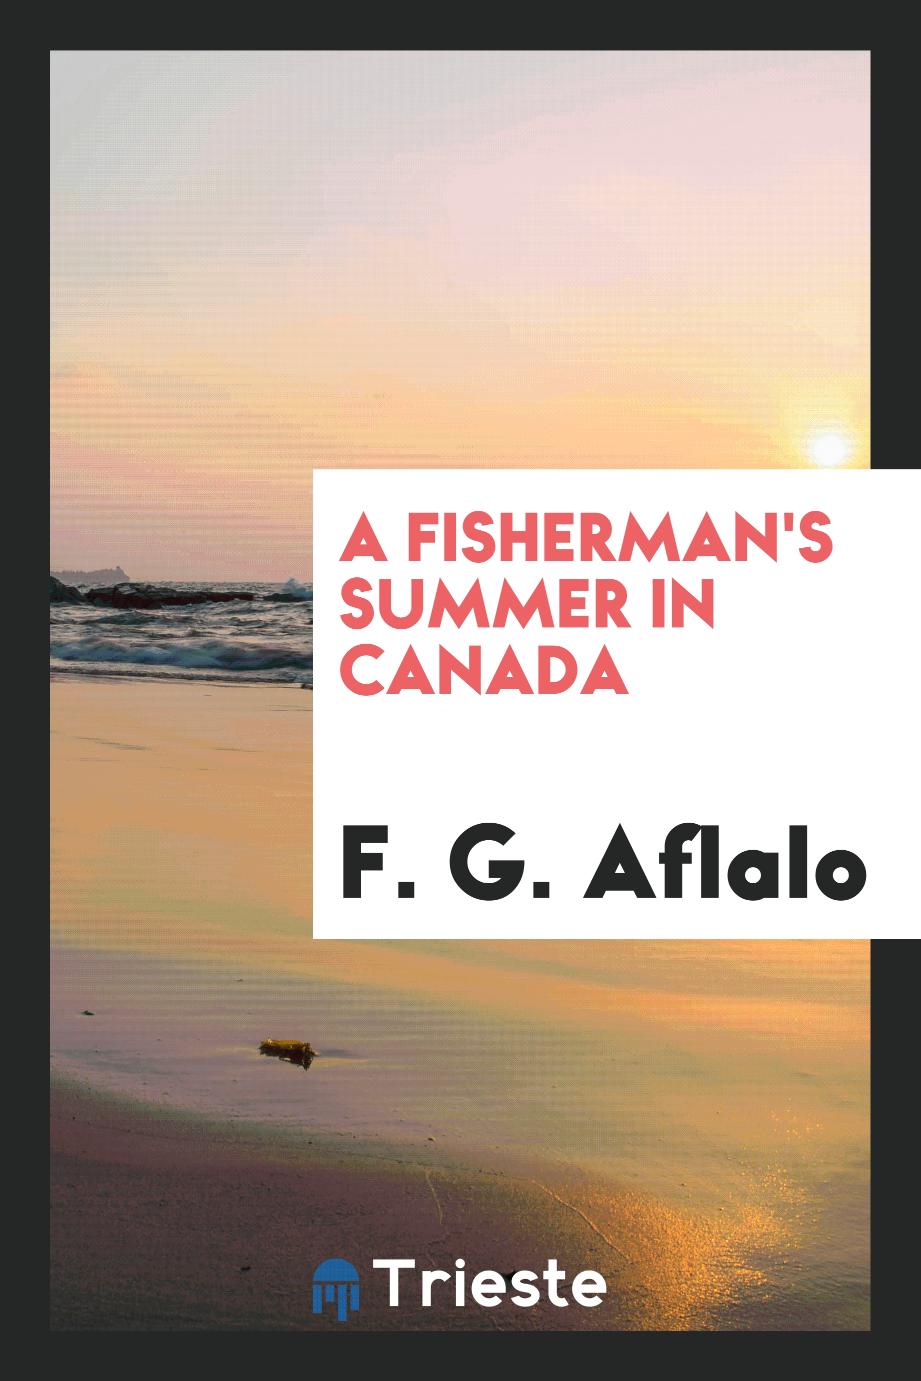 A fisherman's summer in Canada